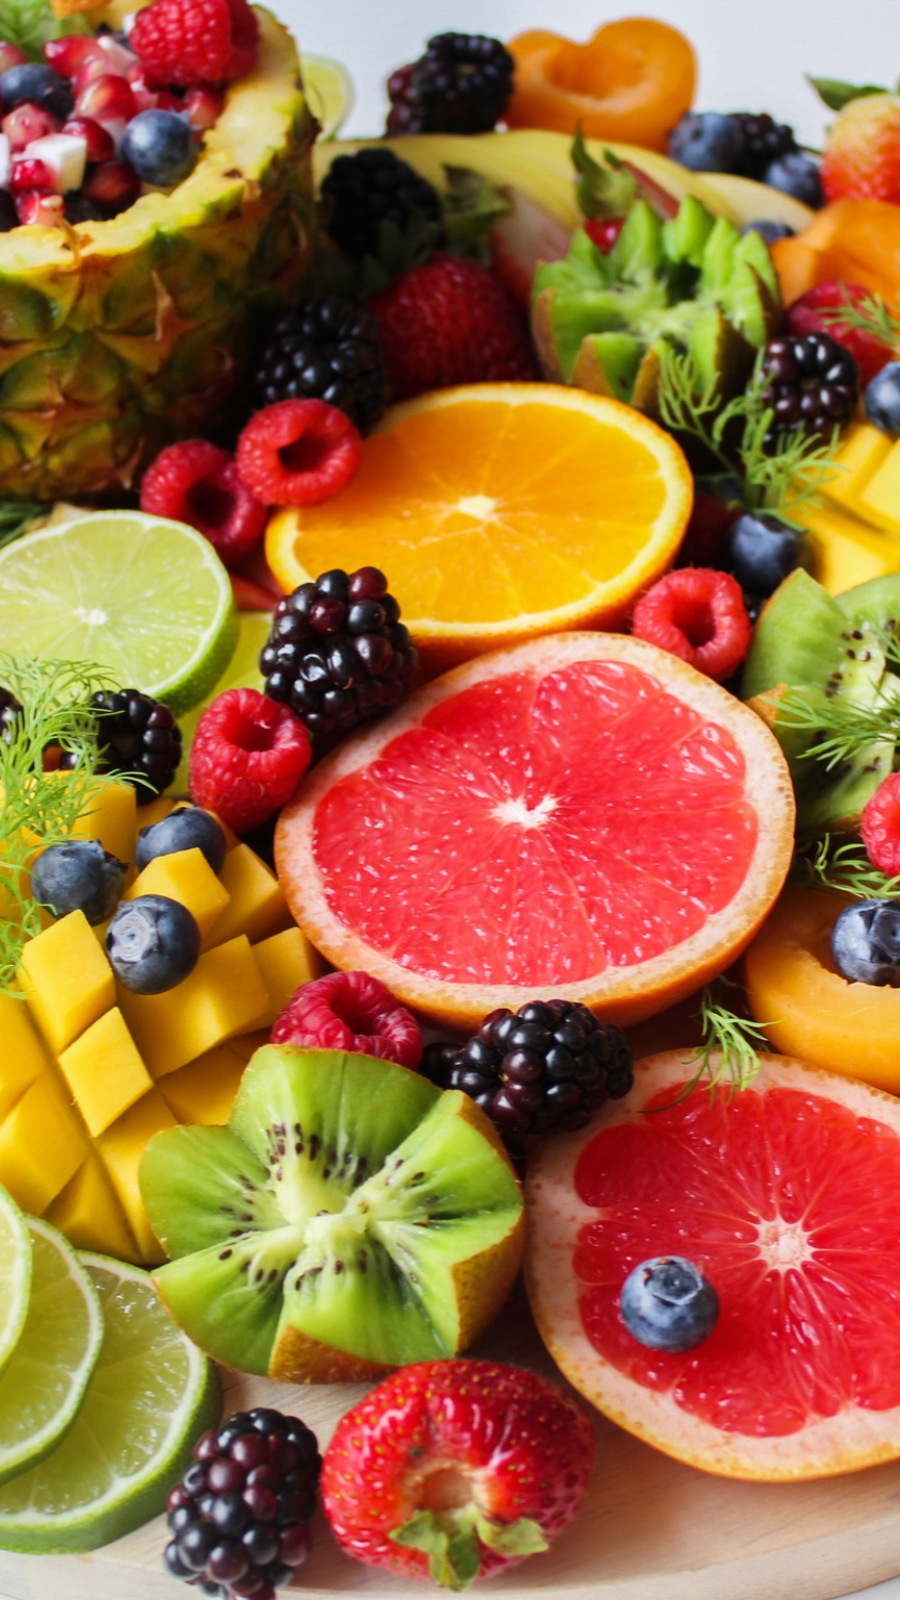 9 Quick and easy ways to add fruits into every meal  